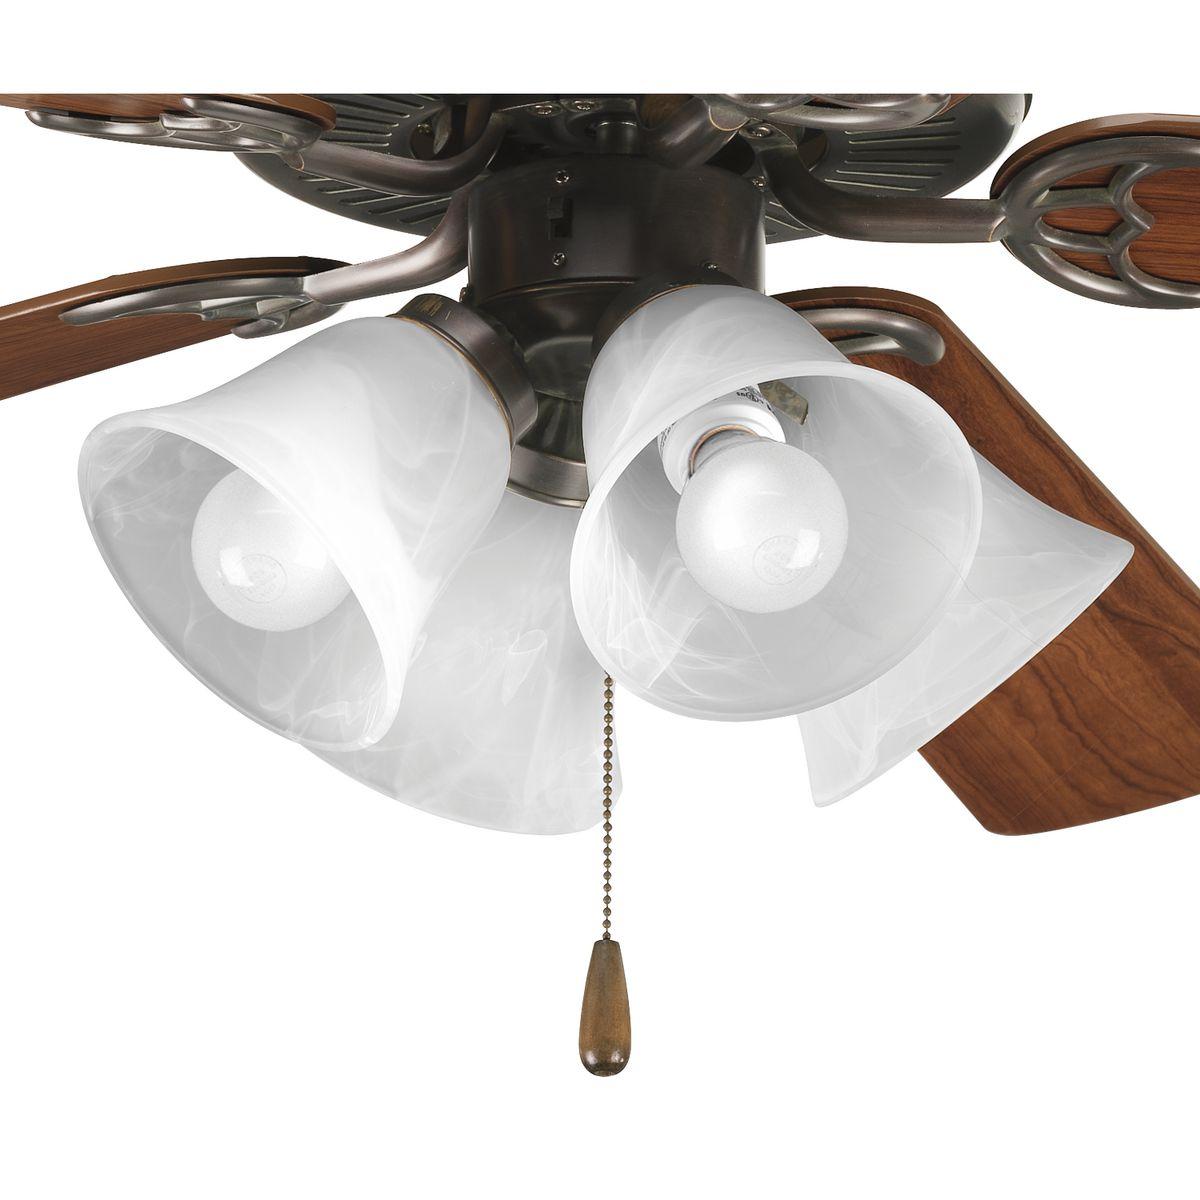 Hubbell P2610-20WB Four-light kit with white washed alabaster style glass shades beautiful in design. Innovative spring clip glass attachment system eliminates unsightly excess hardware. Good for use with P2500 and P2501 ceiling fans and includes quick connector for easy wi